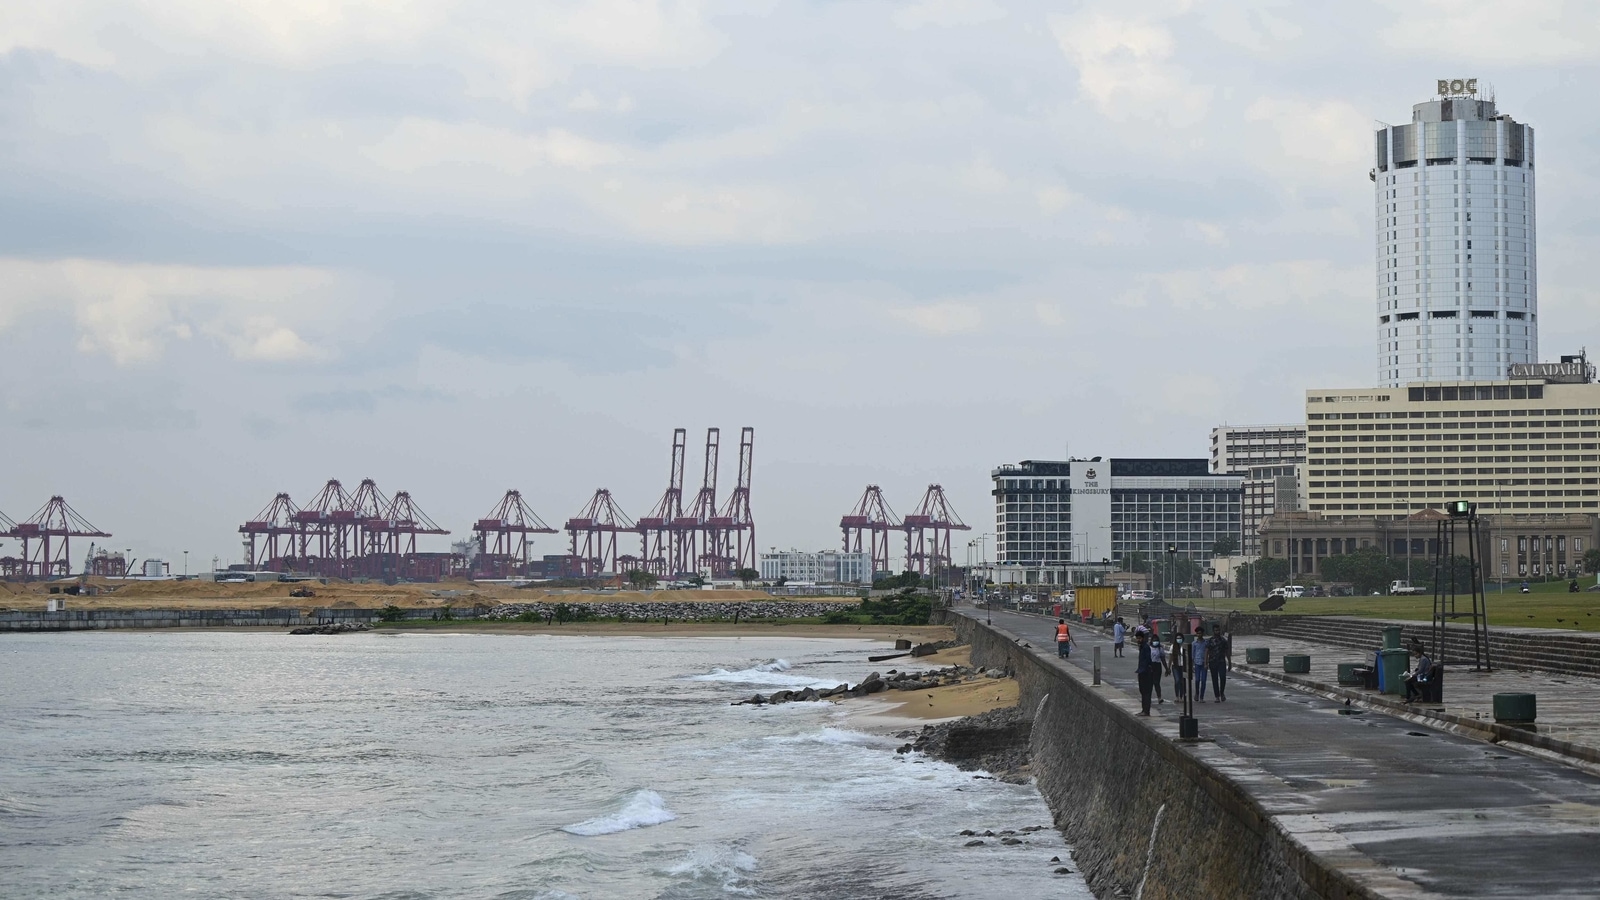 Sri Lanka offers to develop new port terminal with India, Japan amid differences